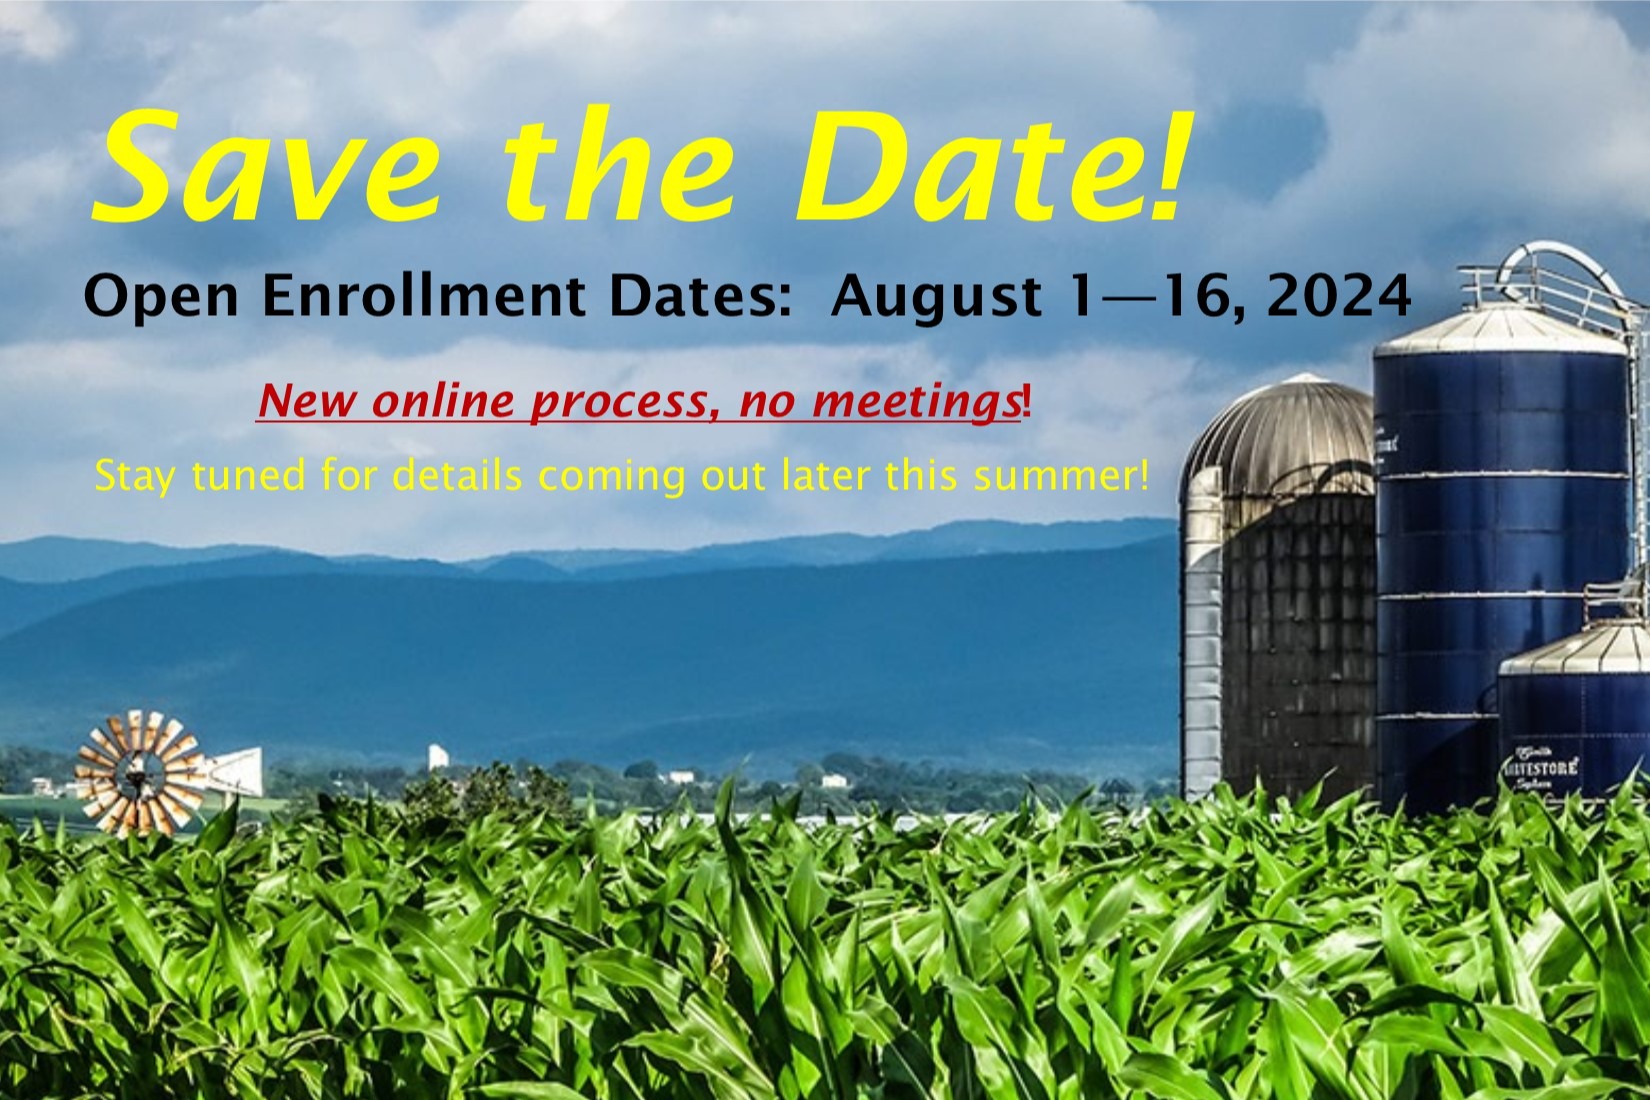 Save the Date Open Enrollment